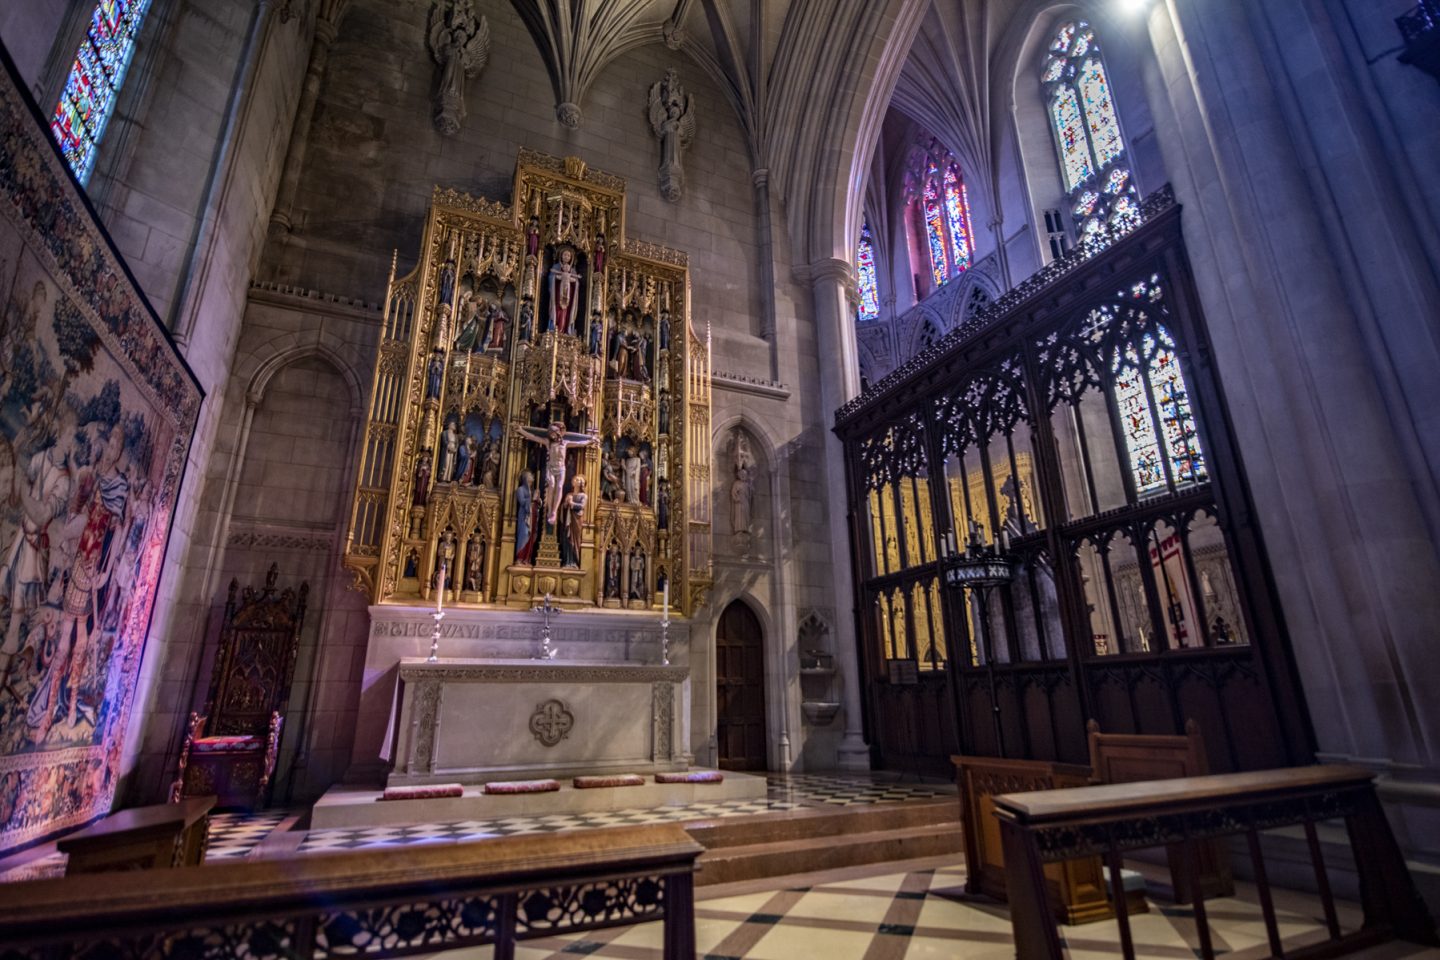 View of the altar and reredos in the Cathedral's St. Mary's Chapel